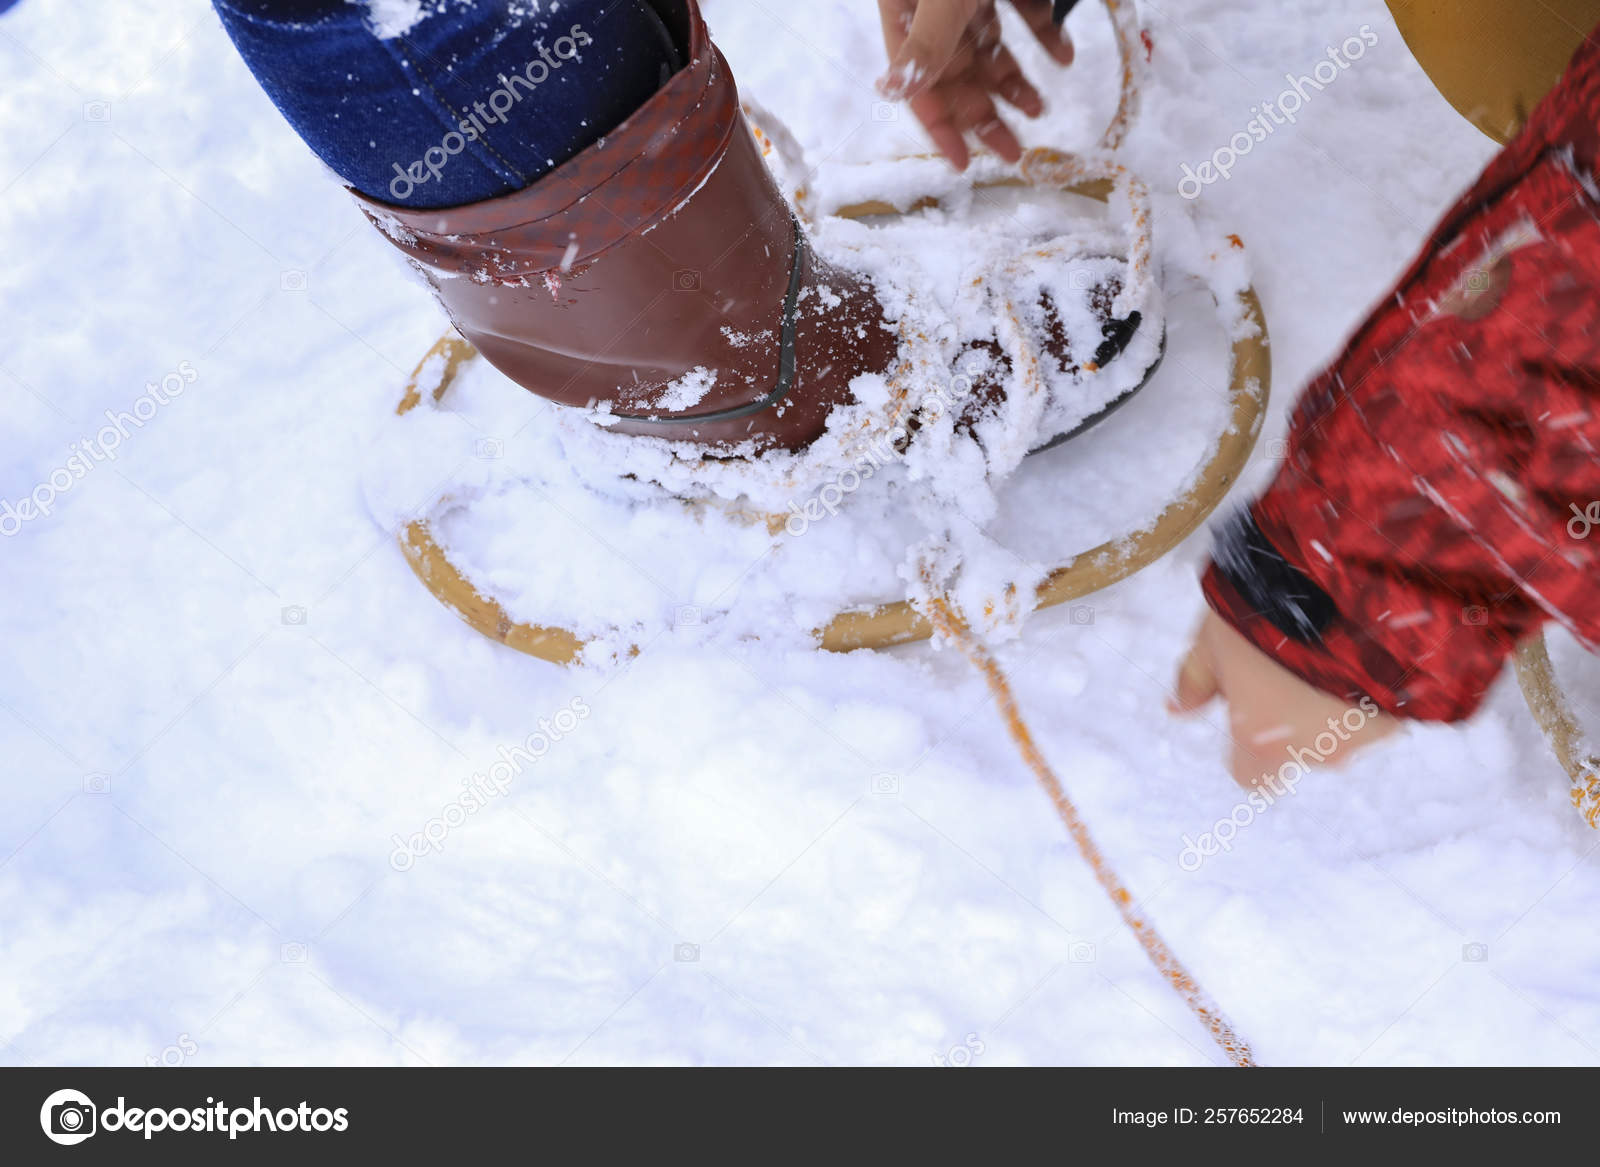 snow walking shoes